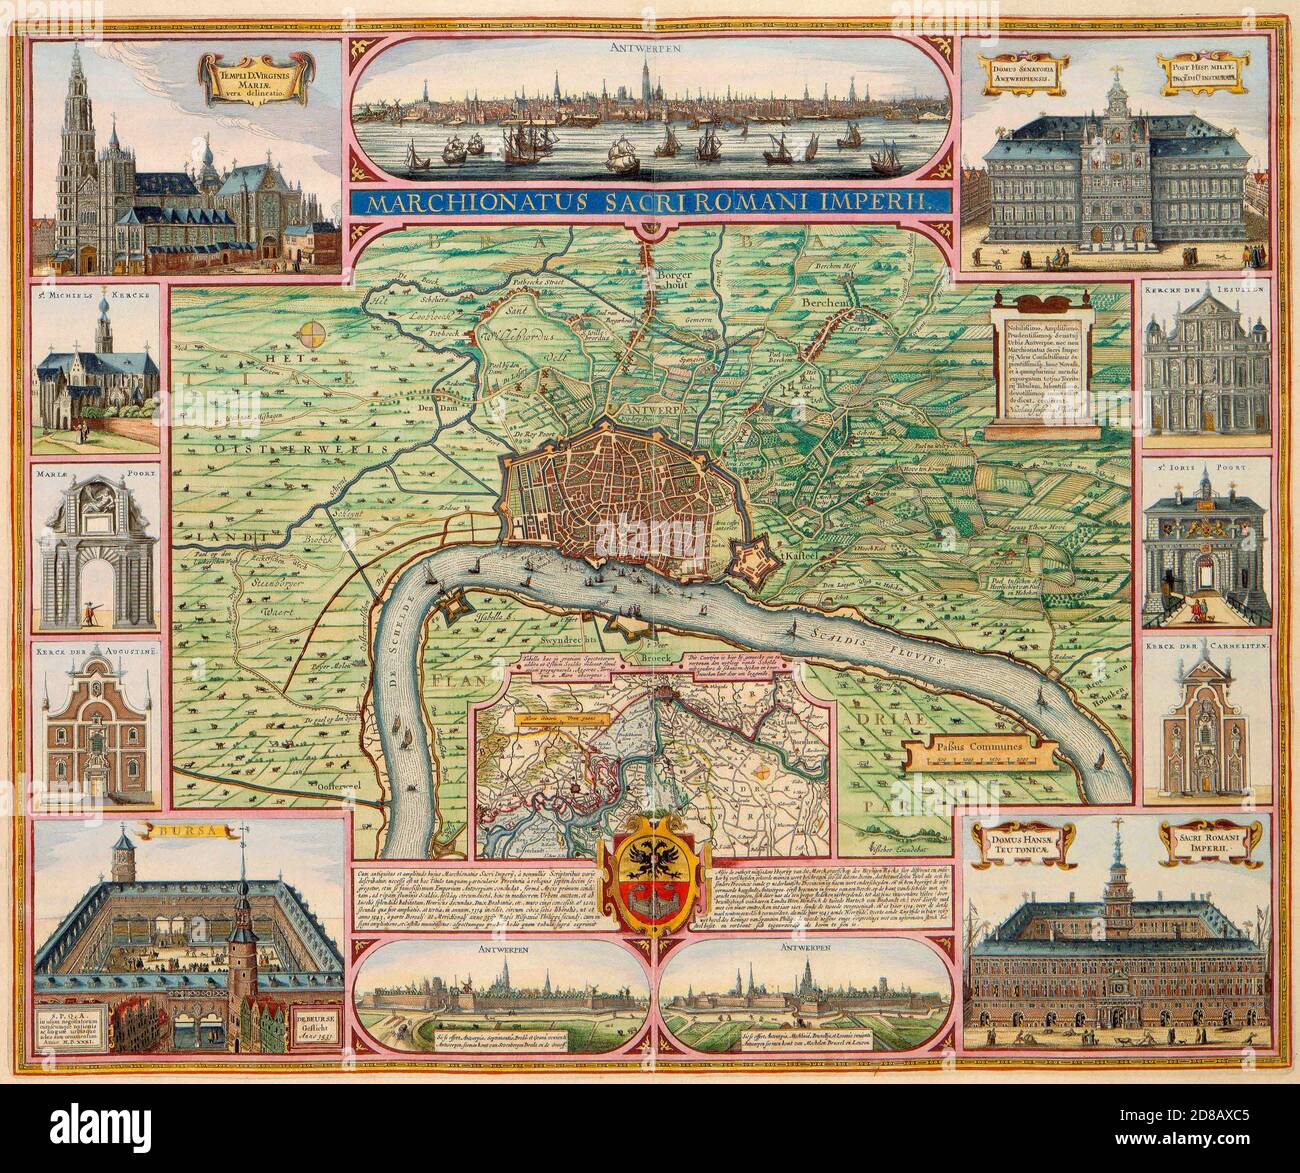 Antwerp, the march and the most important buildings, 1624 Stock Photo